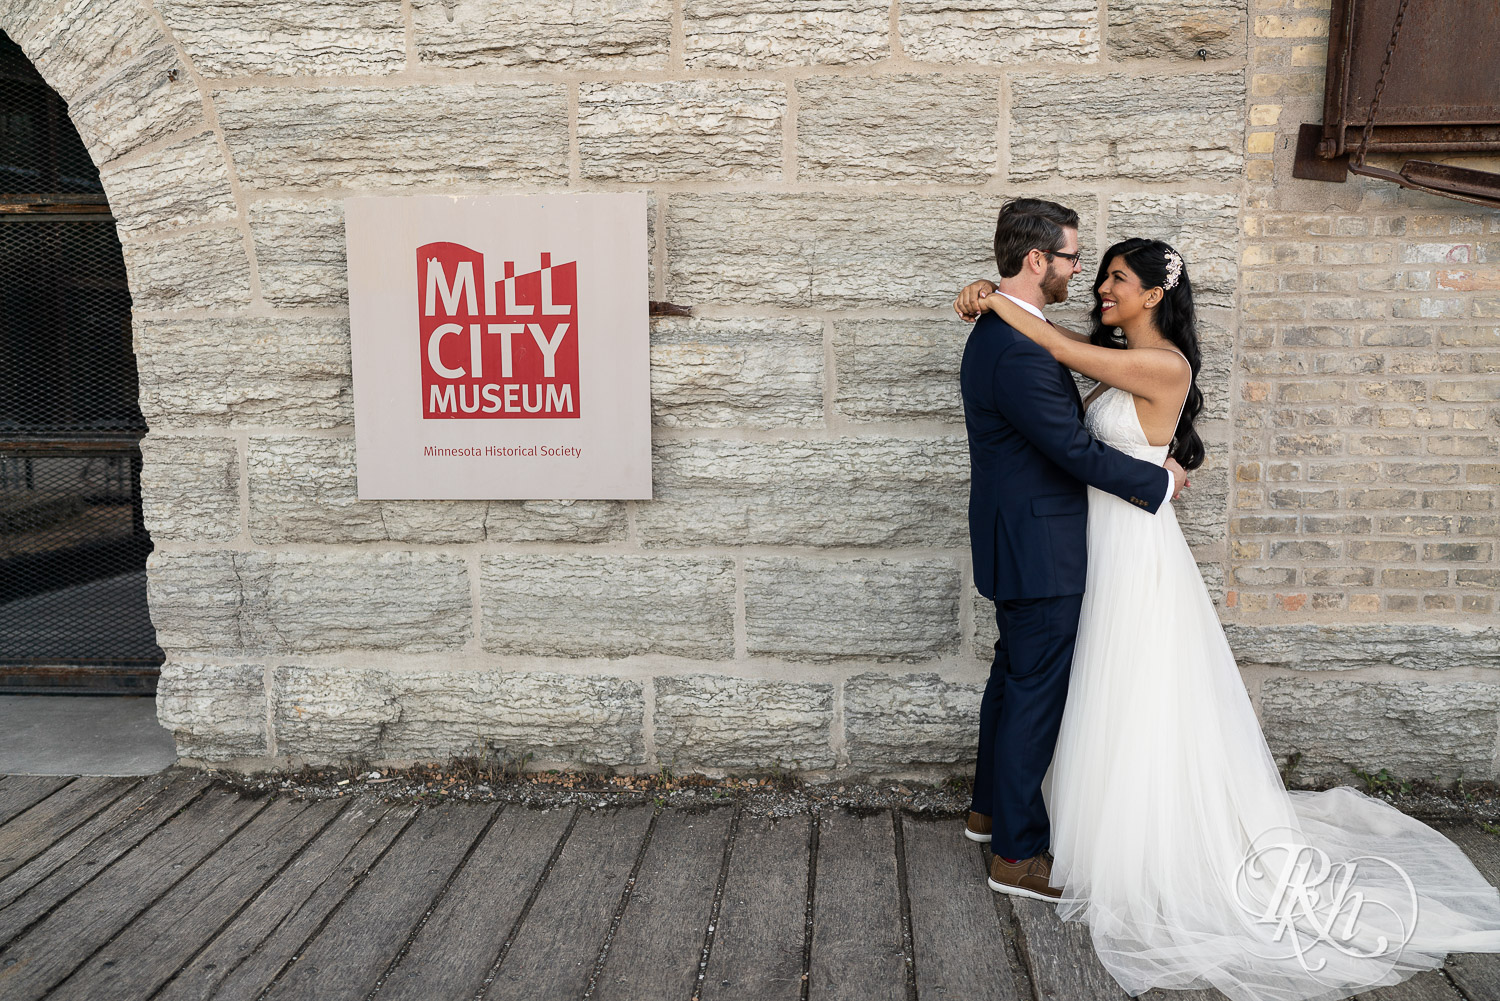 Bride and groom smiling in front of the Mill City Museum in Minneapolis, Minnesota